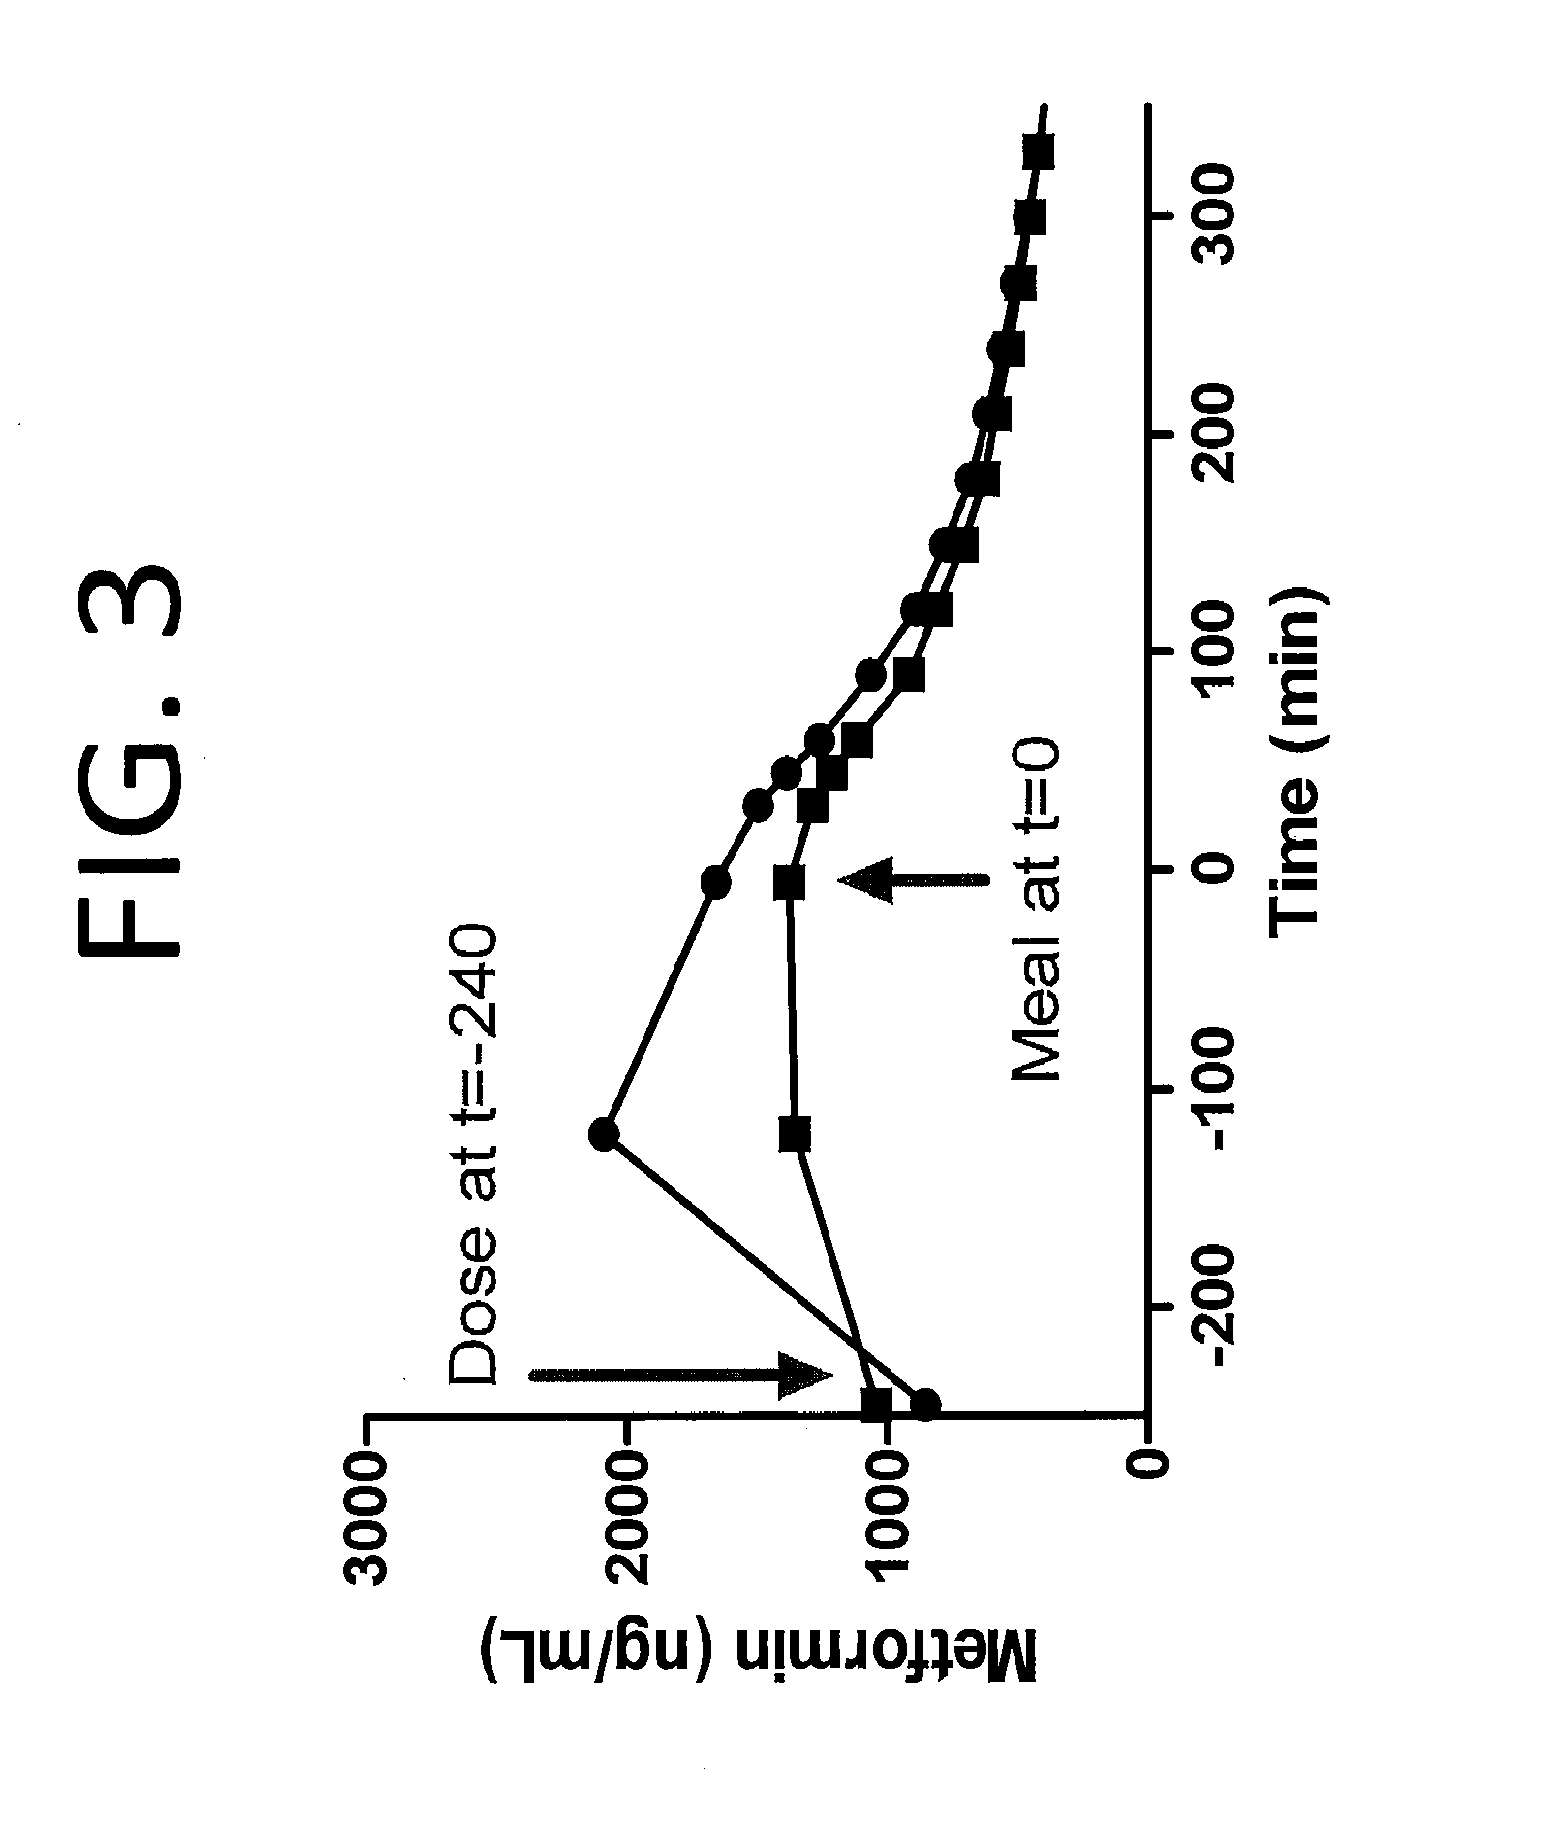 Biguanide compositions and methods of treating metabolic disorders